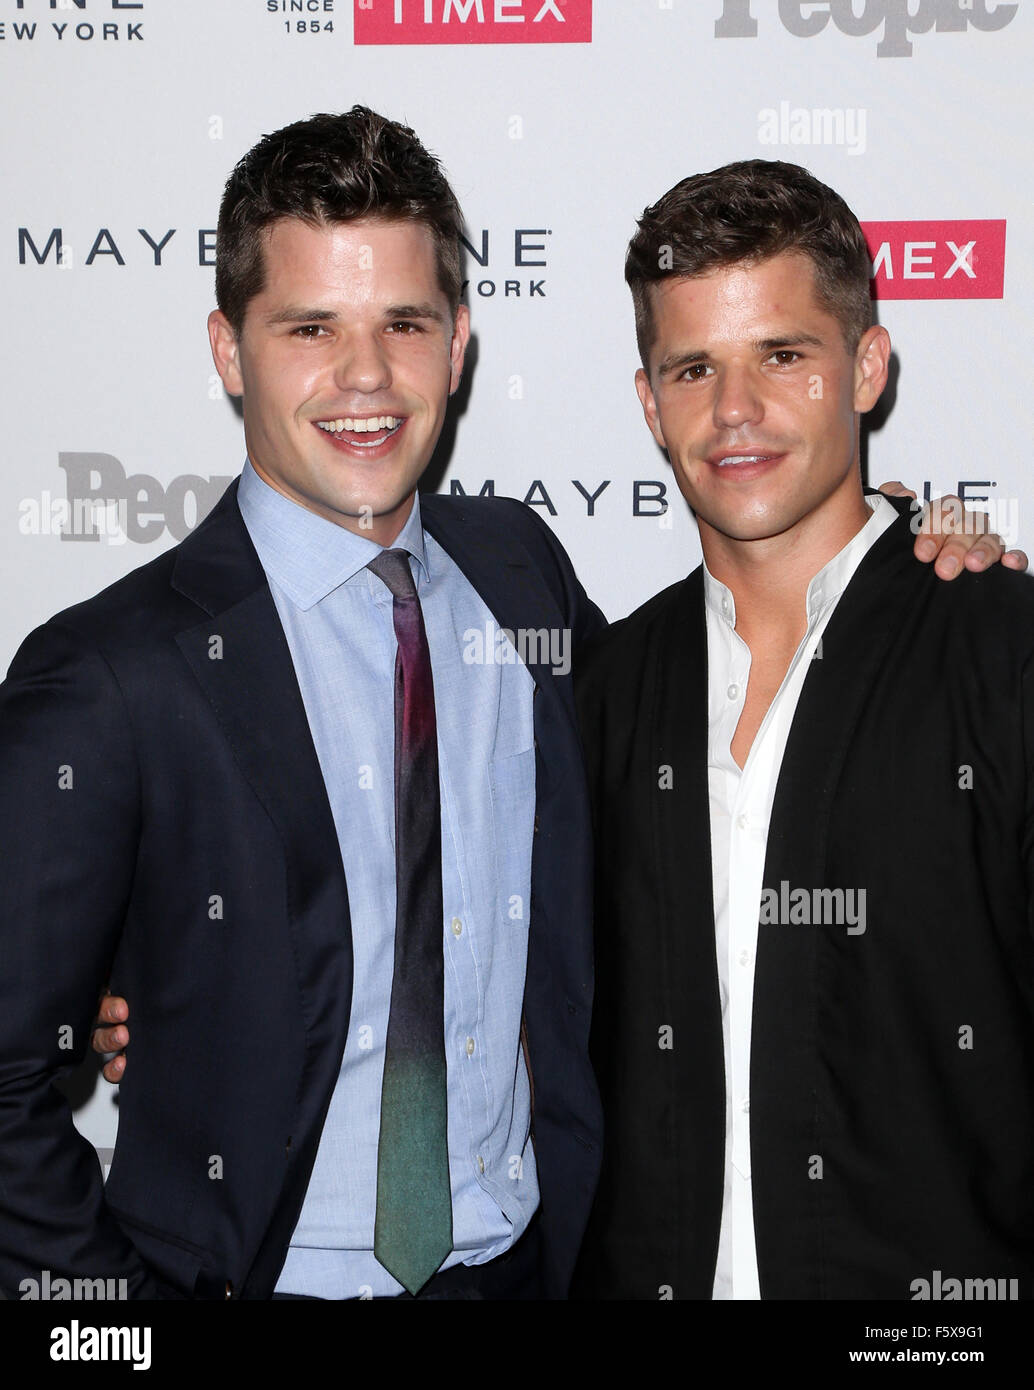 Max carver hi-res stock photography and images - Alamy